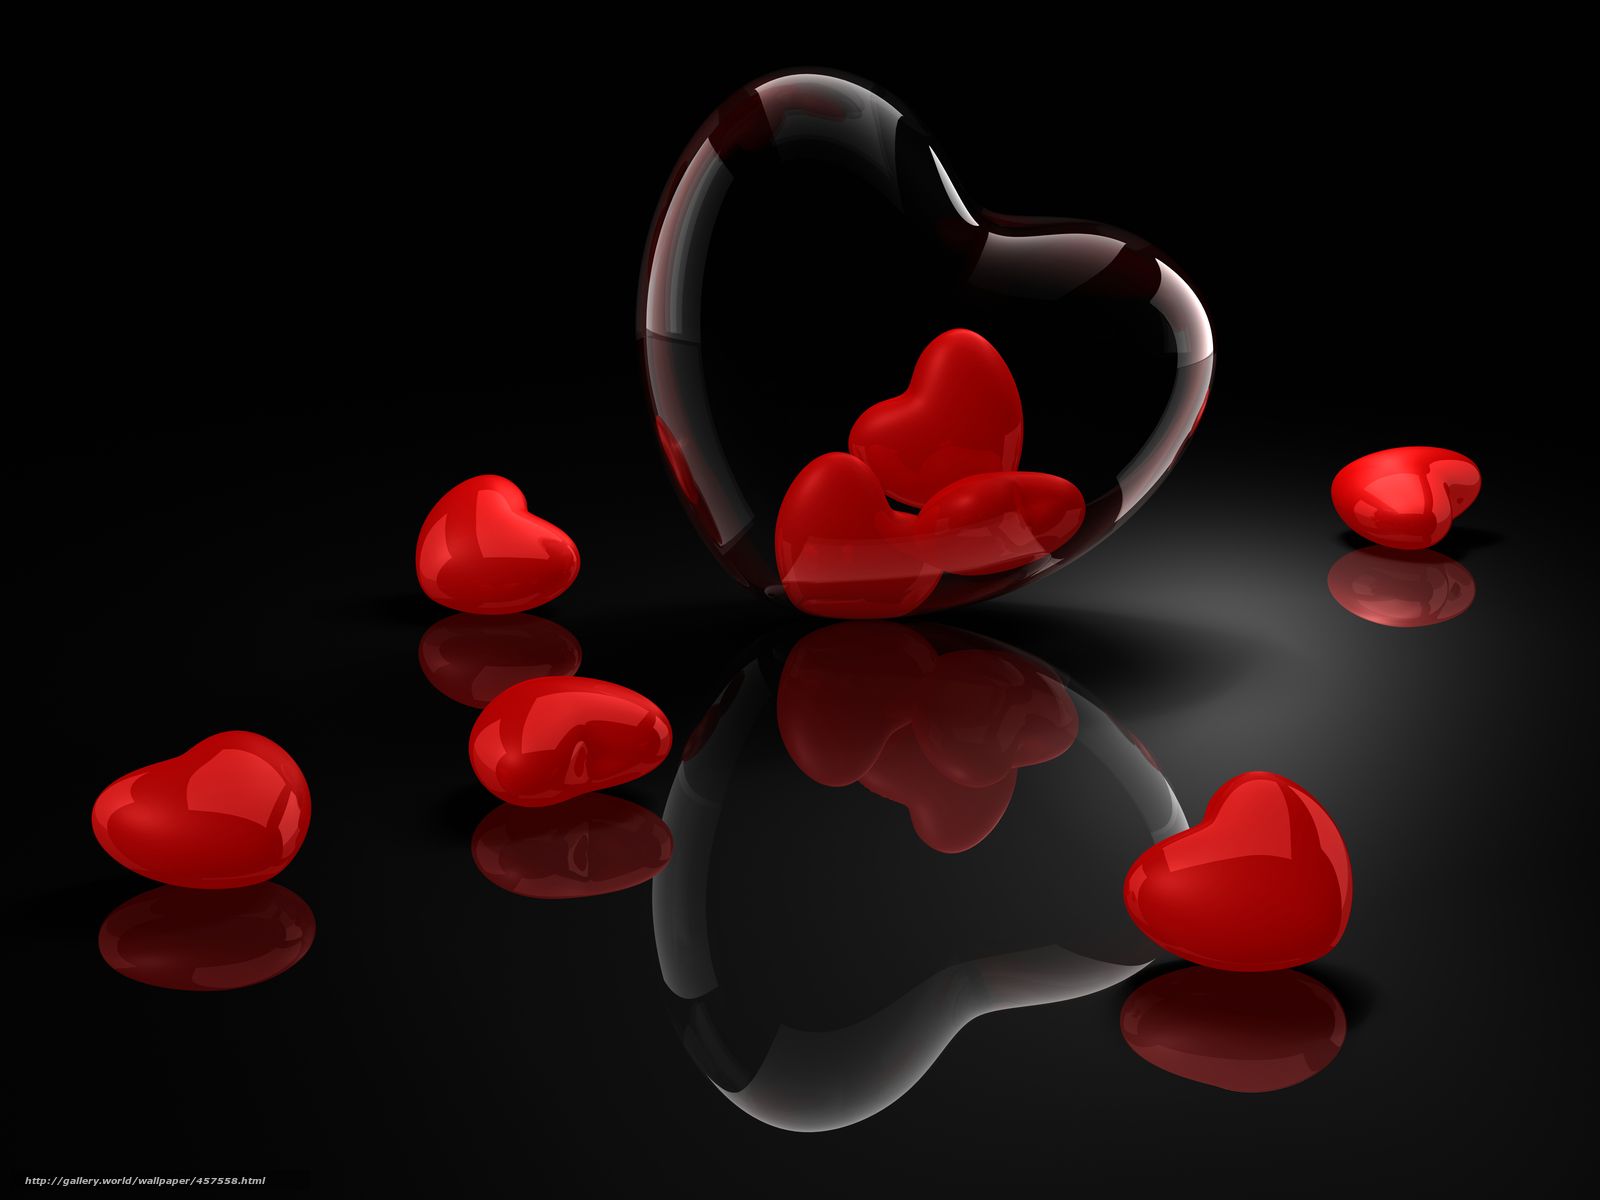 Download wallpaper Valentine's Day, Hearts, Black Background free desktop wallpaper in the resolution 4800. Heart wallpaper, Love valentines, Happy valentines day